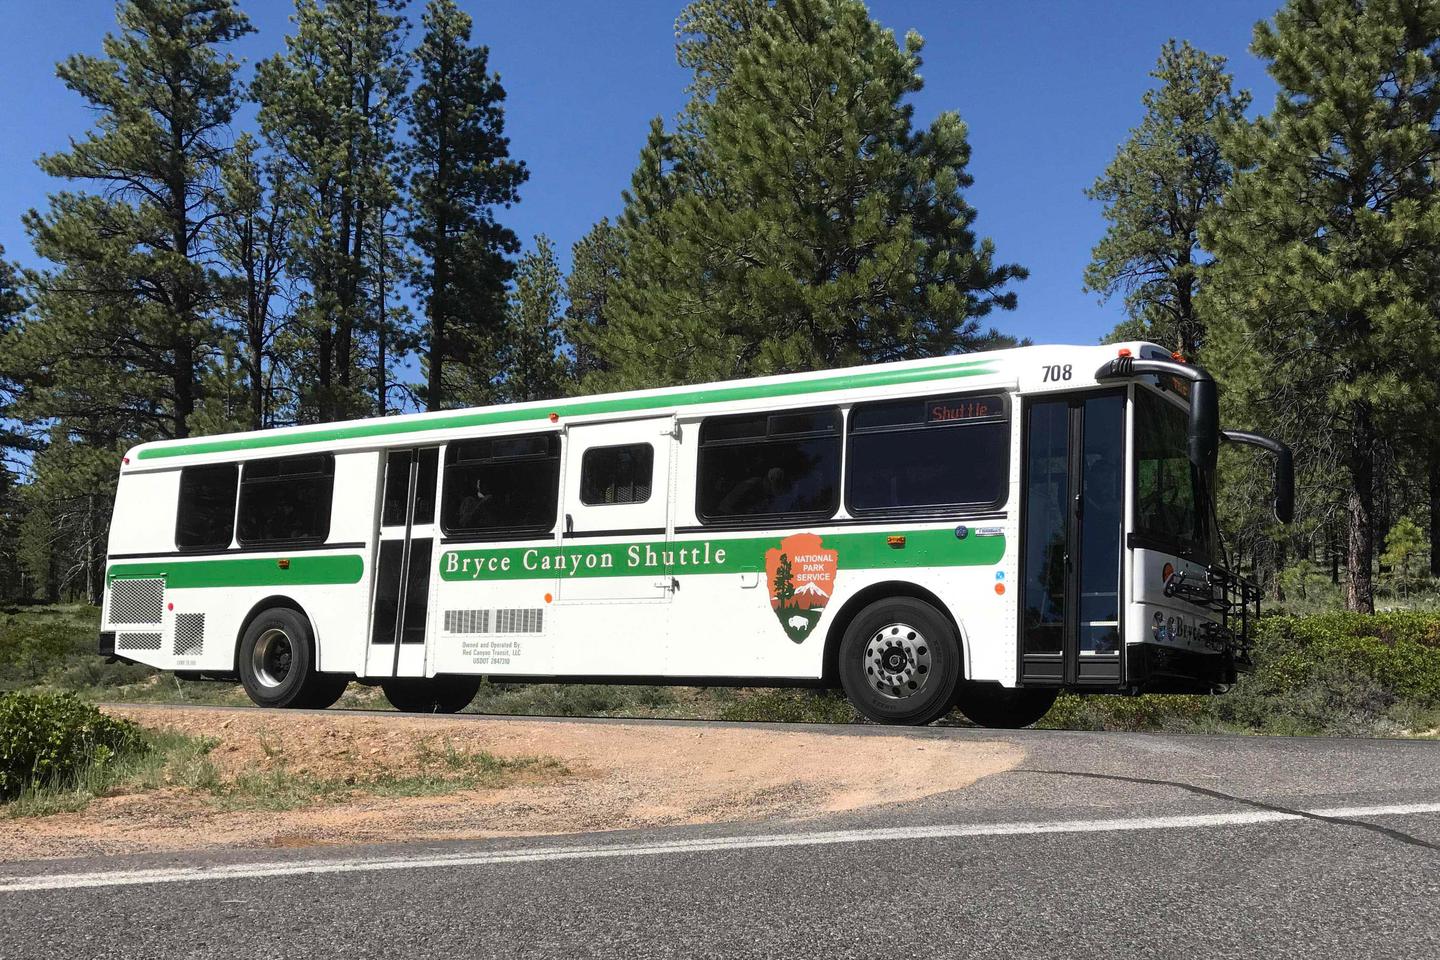 The Bryce Canyon Shuttle provides service from the Visitor CenterFrom April to October, the Bryce Canyon Shuttle provides free service from the Visitor Center to popular park overlooks and facilities.